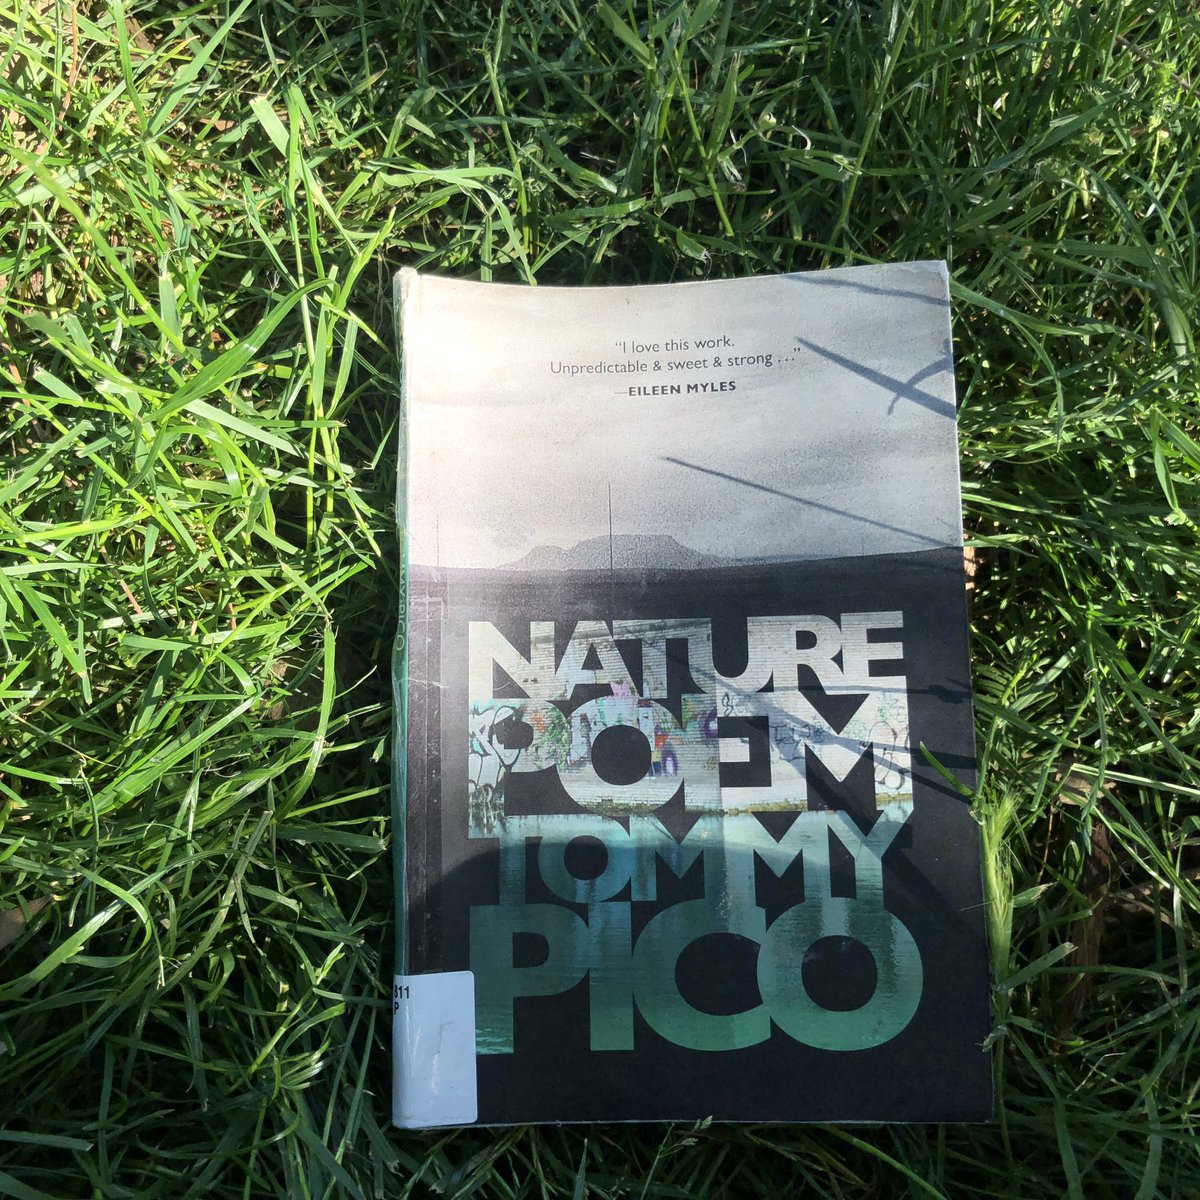 31. Nature Poem - Tommy Pico